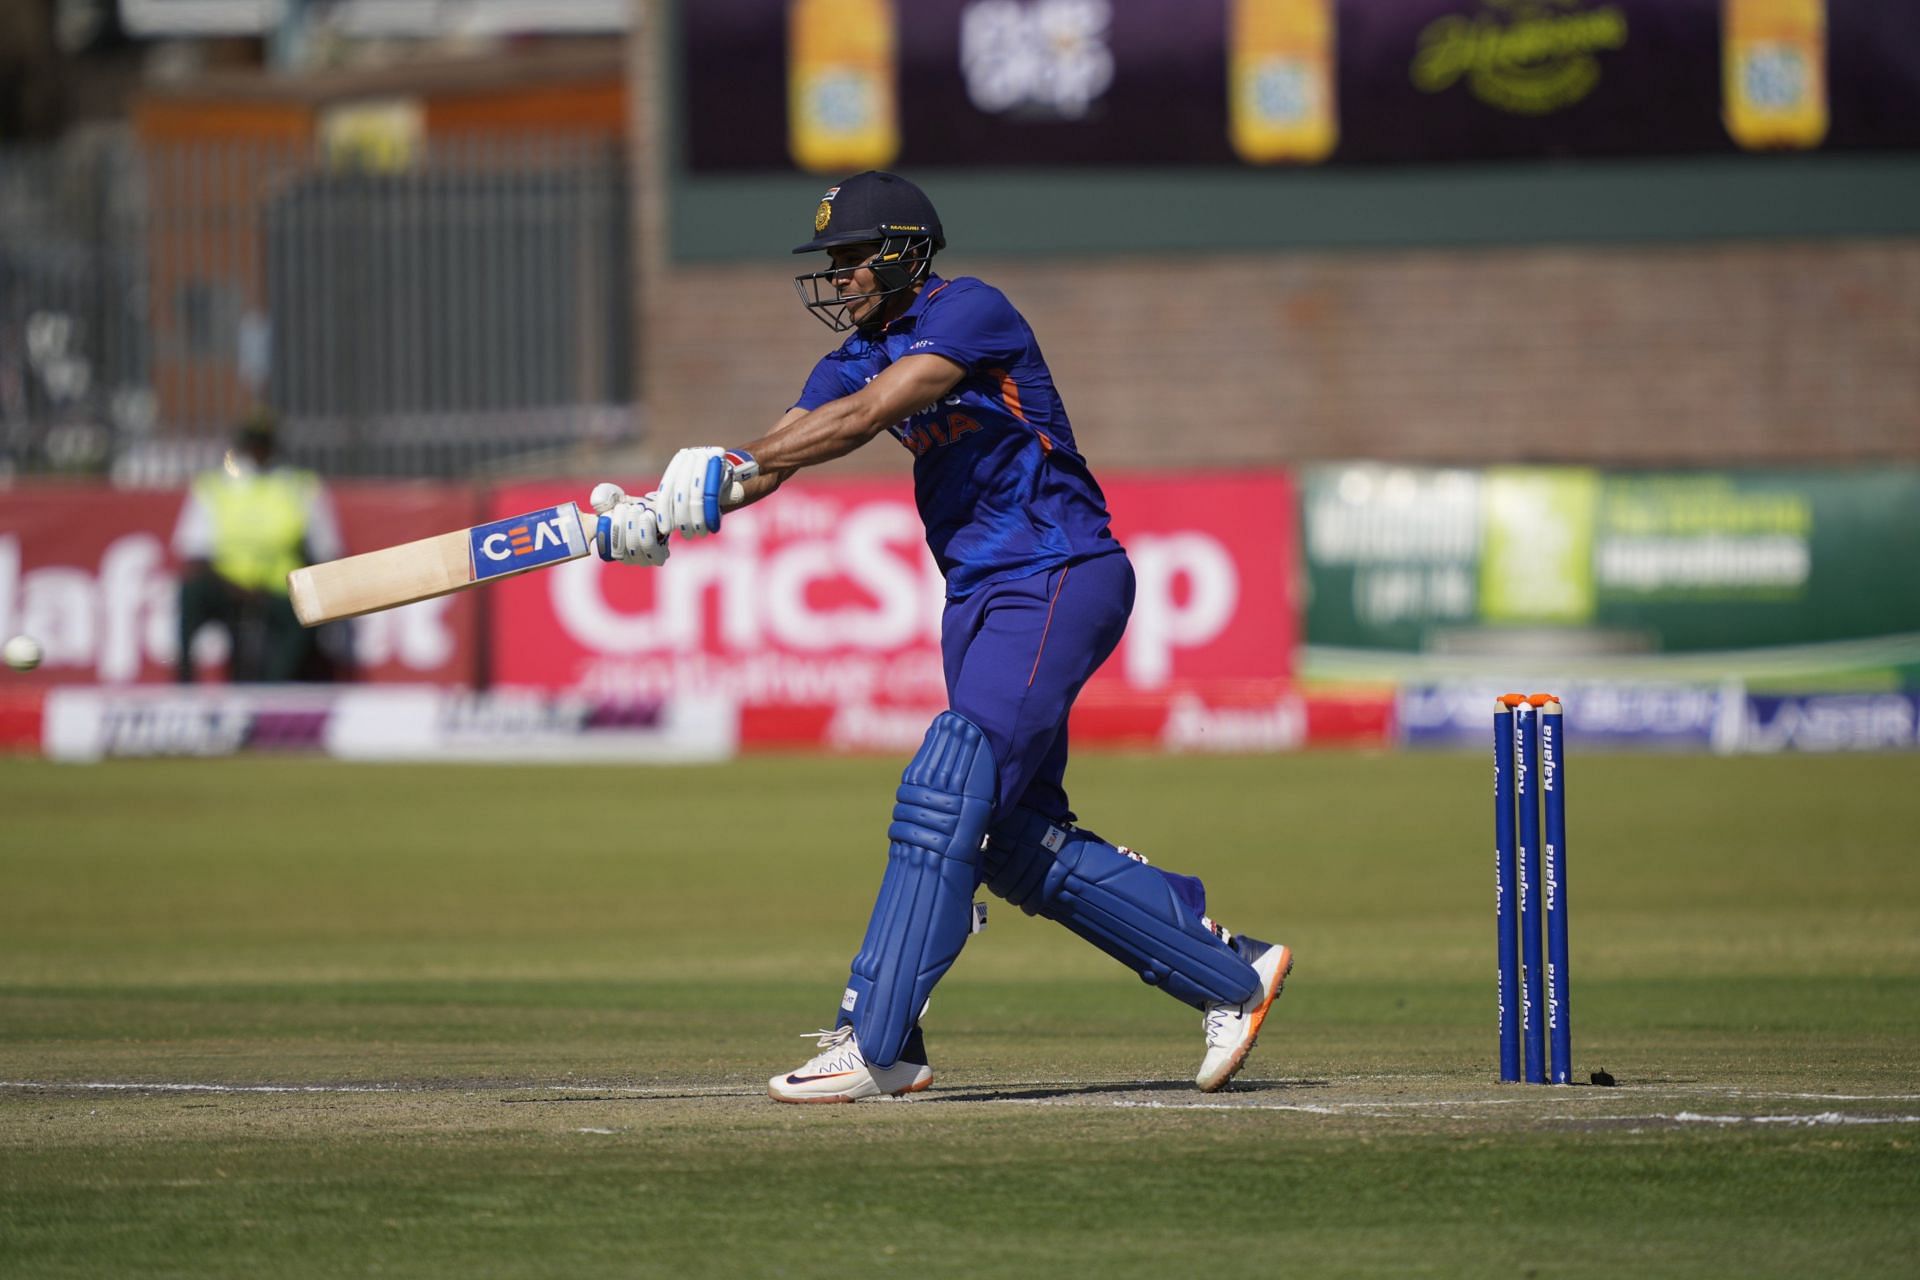 Shubman Gill batted at a good tempo throughout the ODI series